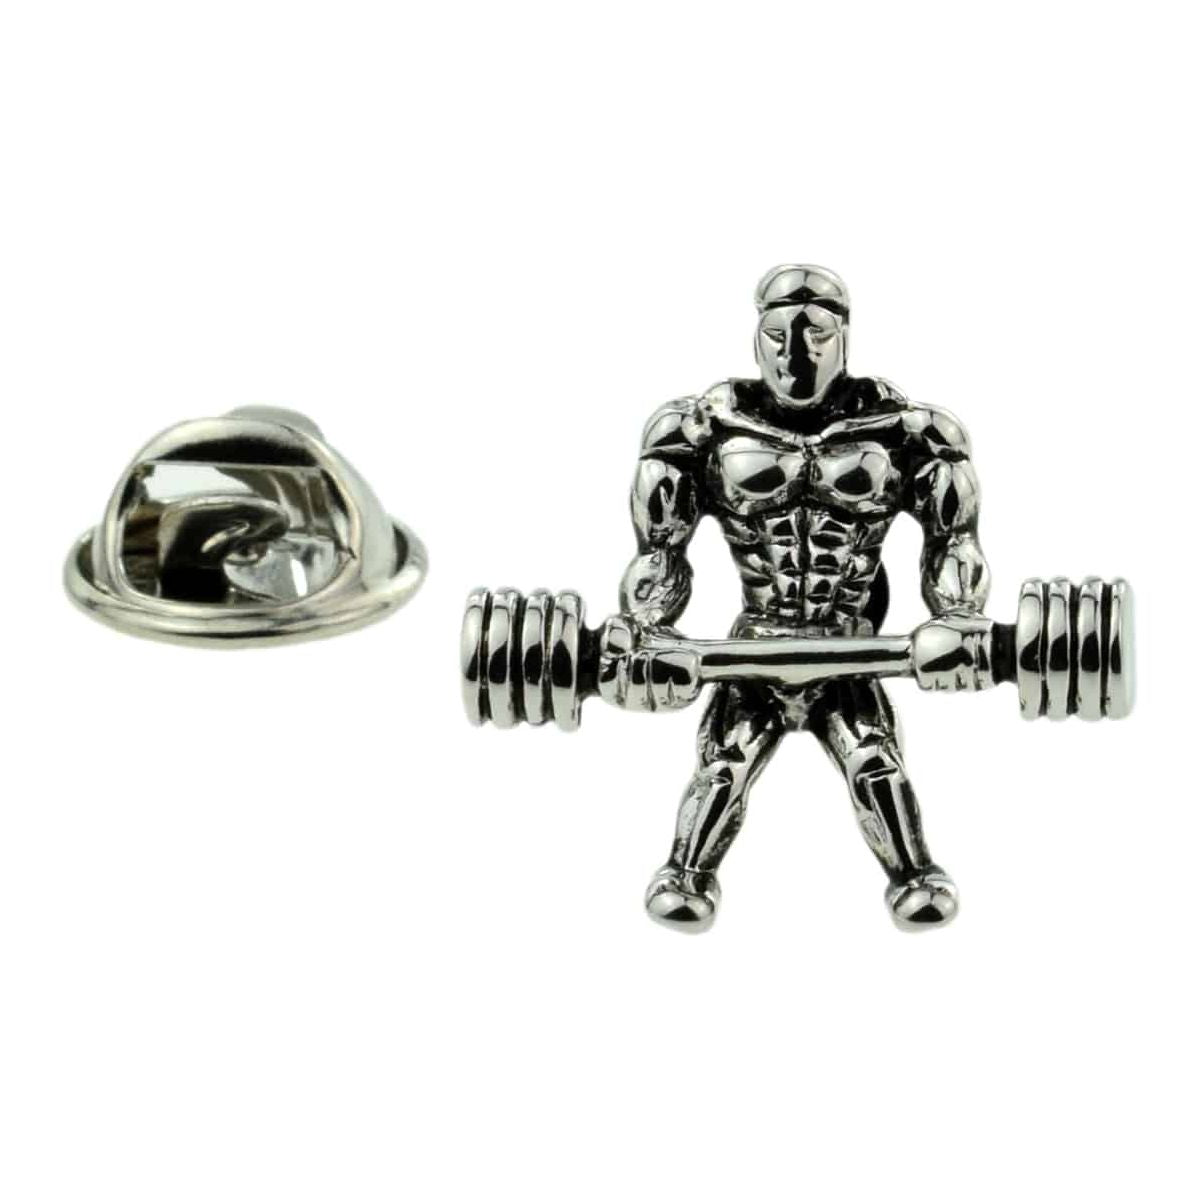 Weight Lifter Lapel Pin Badge - Ashton and Finch